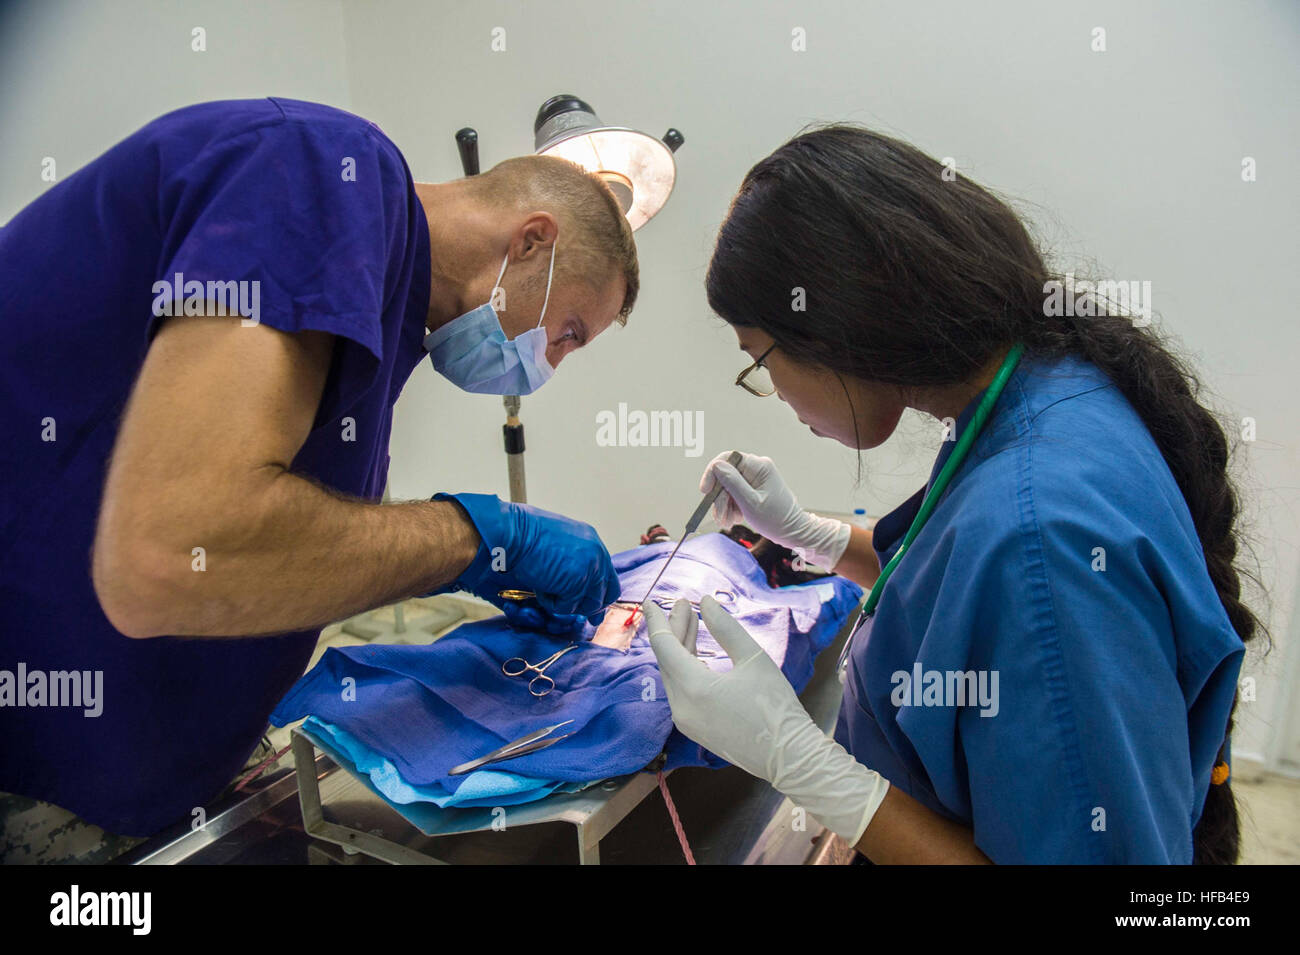 150820-N-YM856-110 SANTO DOMINGO, Dominican Republic (Aug. 20, 2015) Army Maj. Jeremiah Nelson, a veterinarian assigned to 85th Civil Affairs Brigade, Fort Hood, Texas and a Dominican veterinary technician perform surgery on a dog at a veterinary site established at Hospital Clinico Veterinario during Continuing Promise 2015.  Continuing Promise is a U.S. Southern Command-sponsored and U.S. Naval Forces Southern Command/U.S. 4th Fleet-conducted deployment to conduct civil-military operations including humanitarian-civil assistance, subject matter expert exchanges, medical, dental, veterinary a Stock Photo